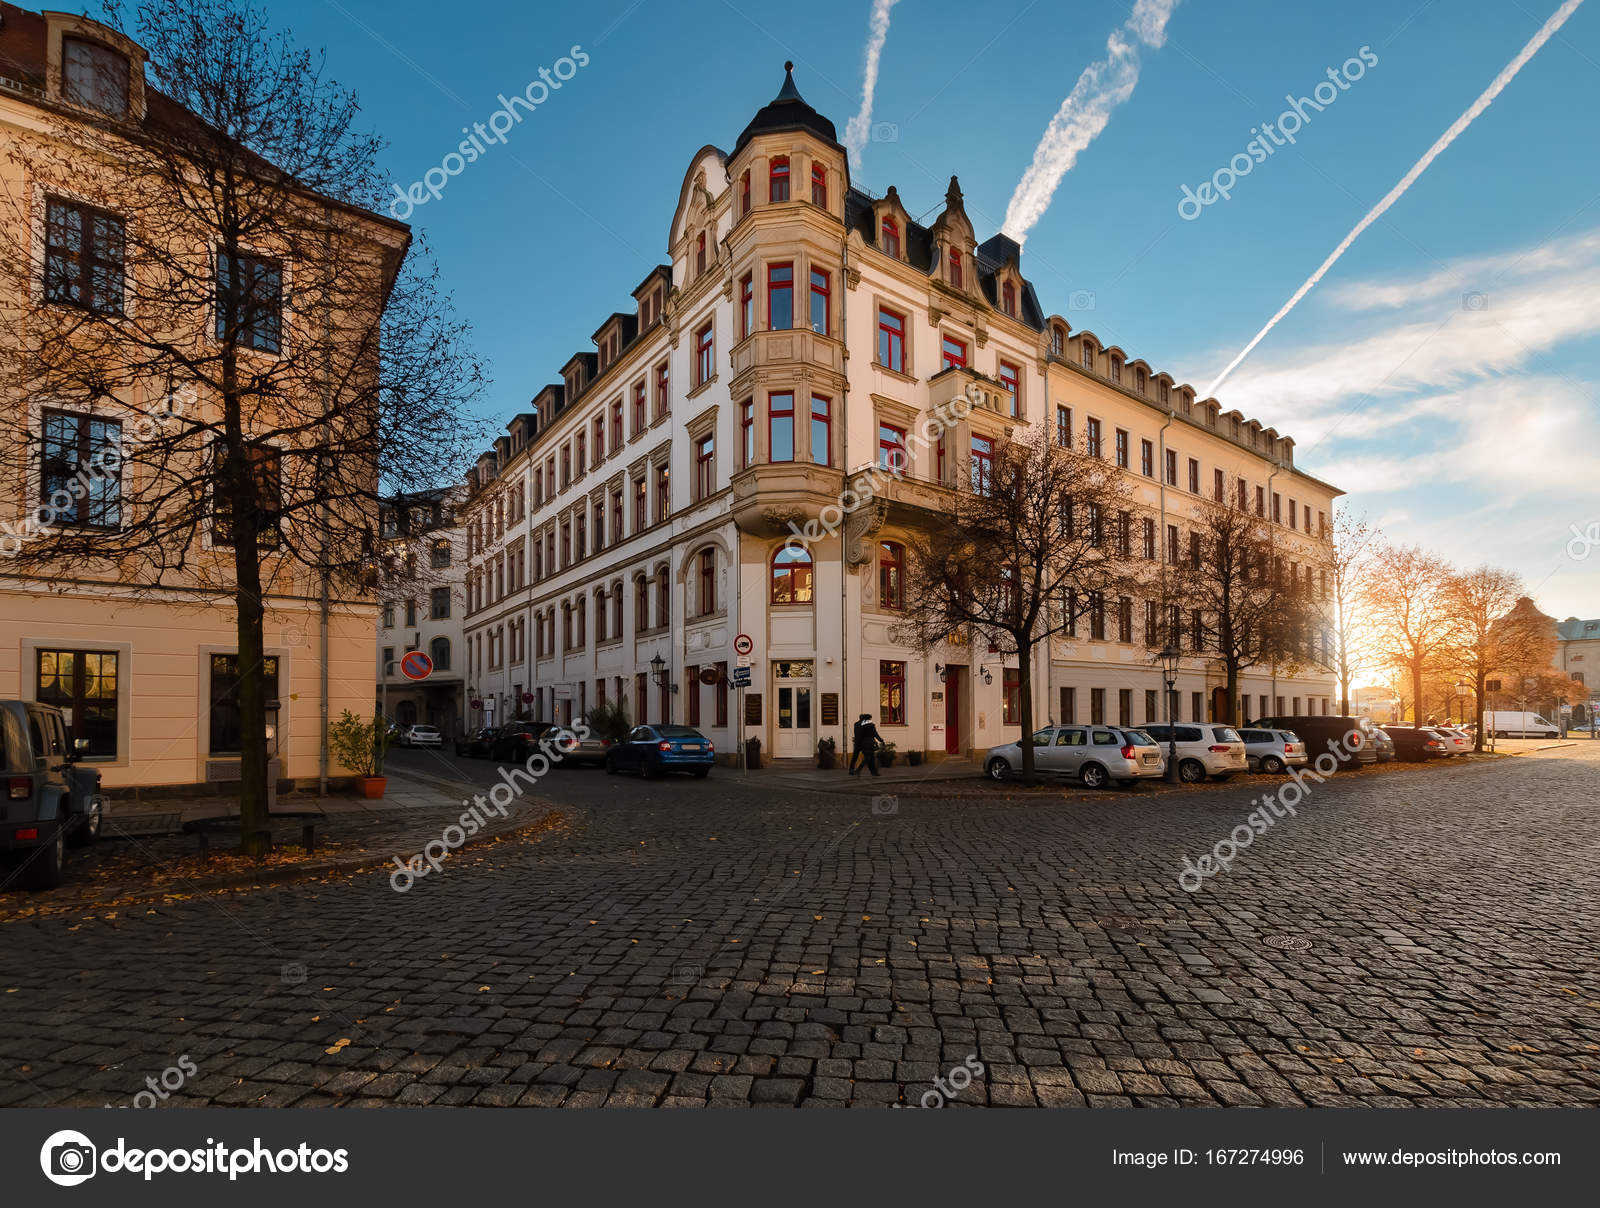 Autumn Street Architecture In Old Town Of Dresden Stock Photo